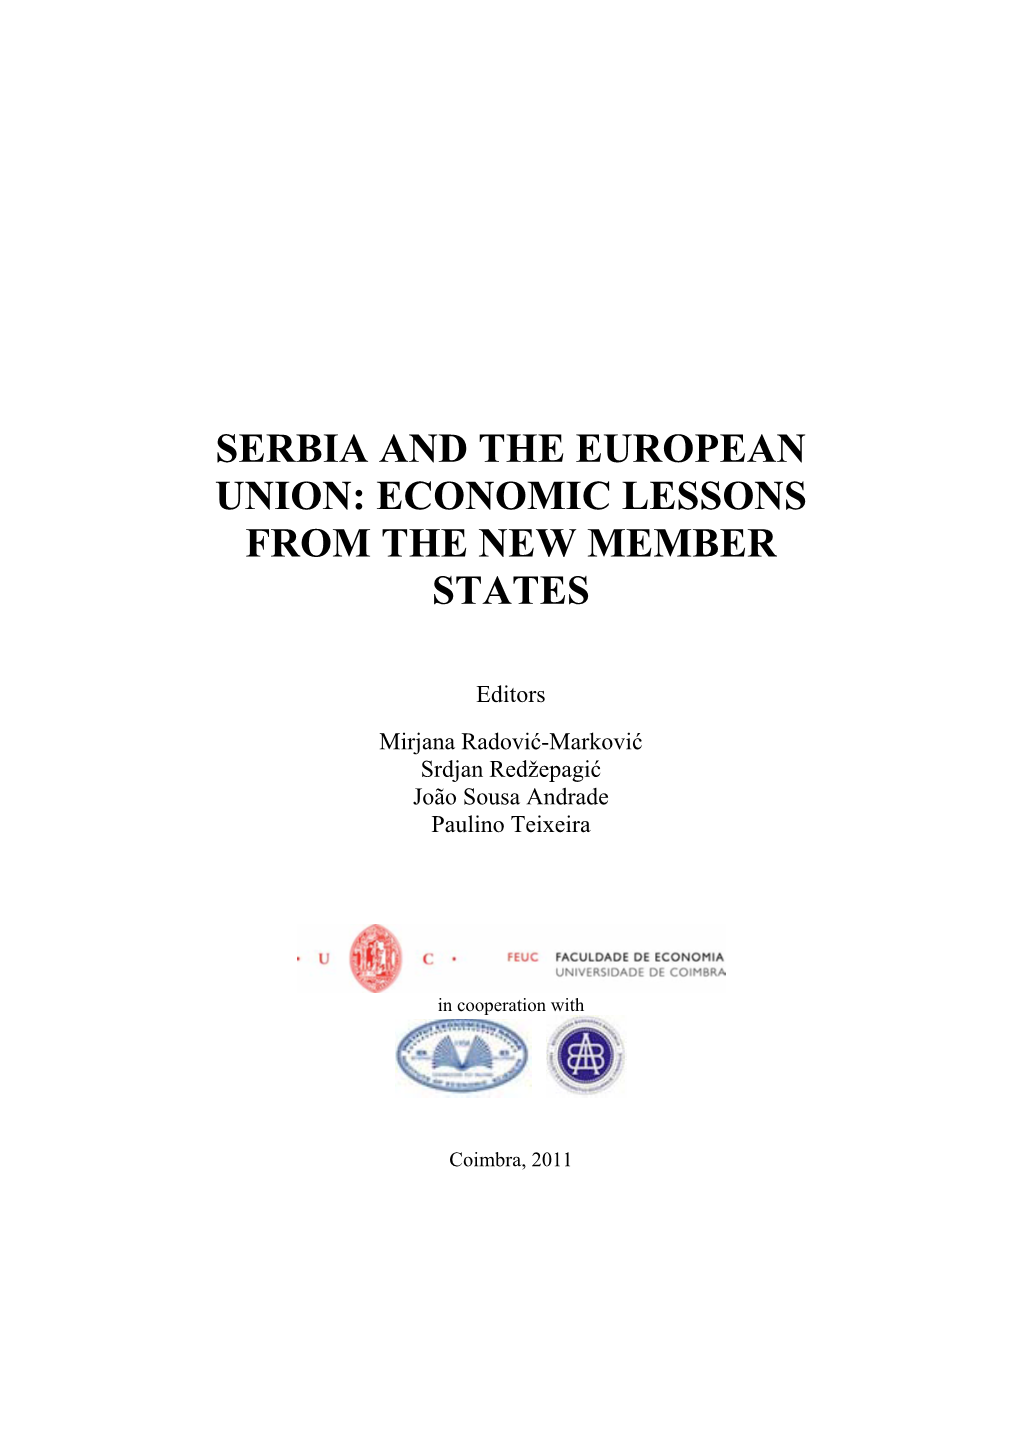 Serbia and the European Union: Economic Lessons from the New Member States